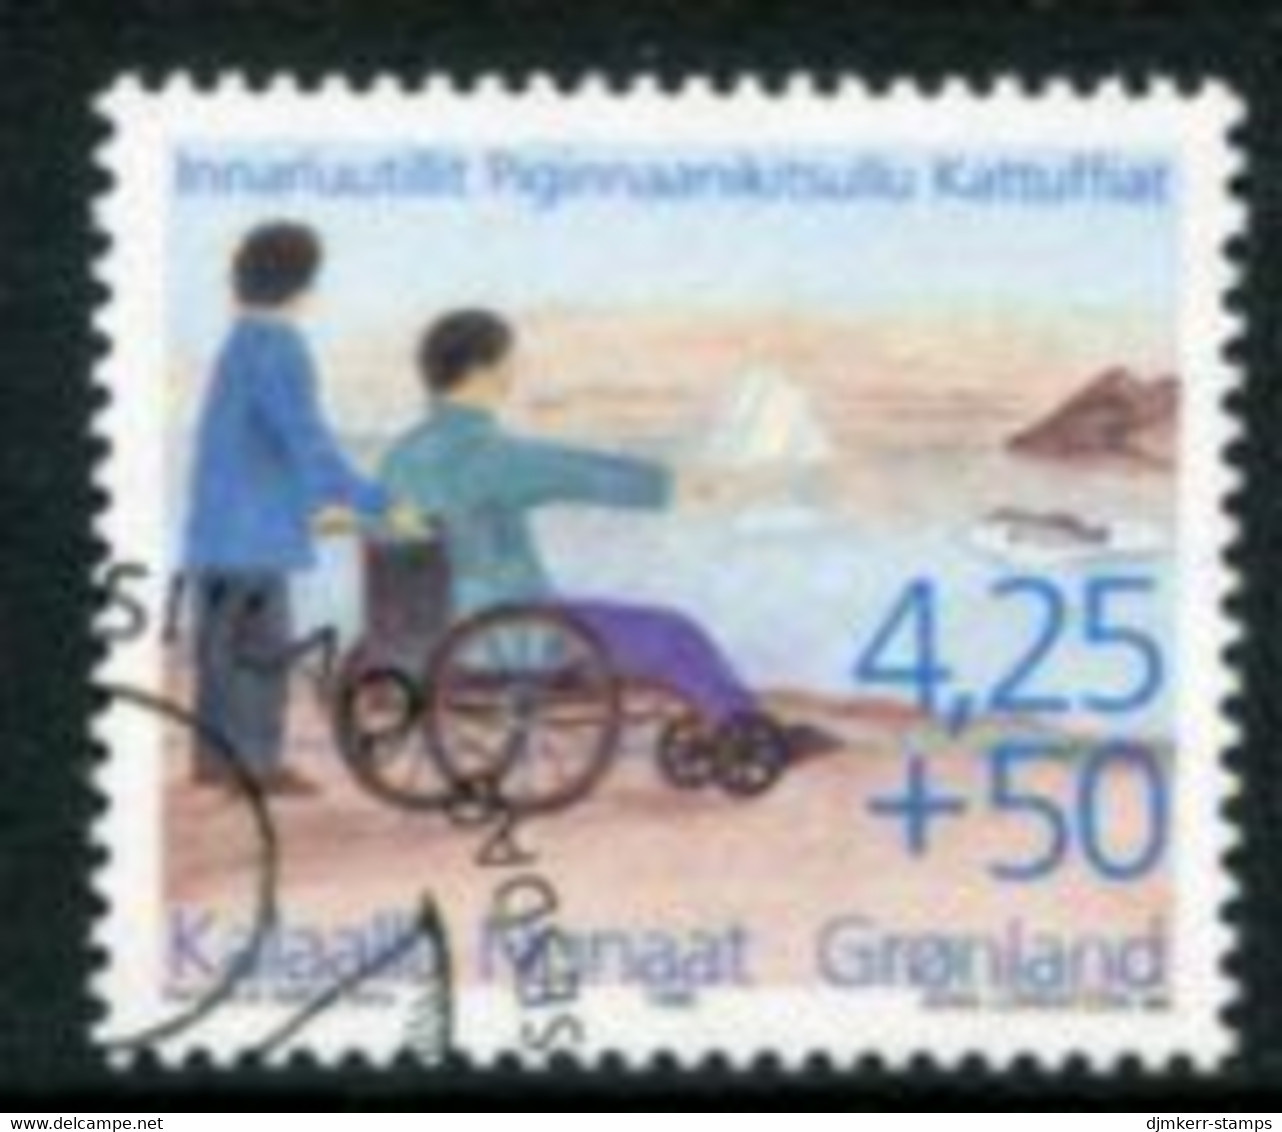 GREENLAND 1996 Society For The Disabled Used  Michel 296 - Oblitérés